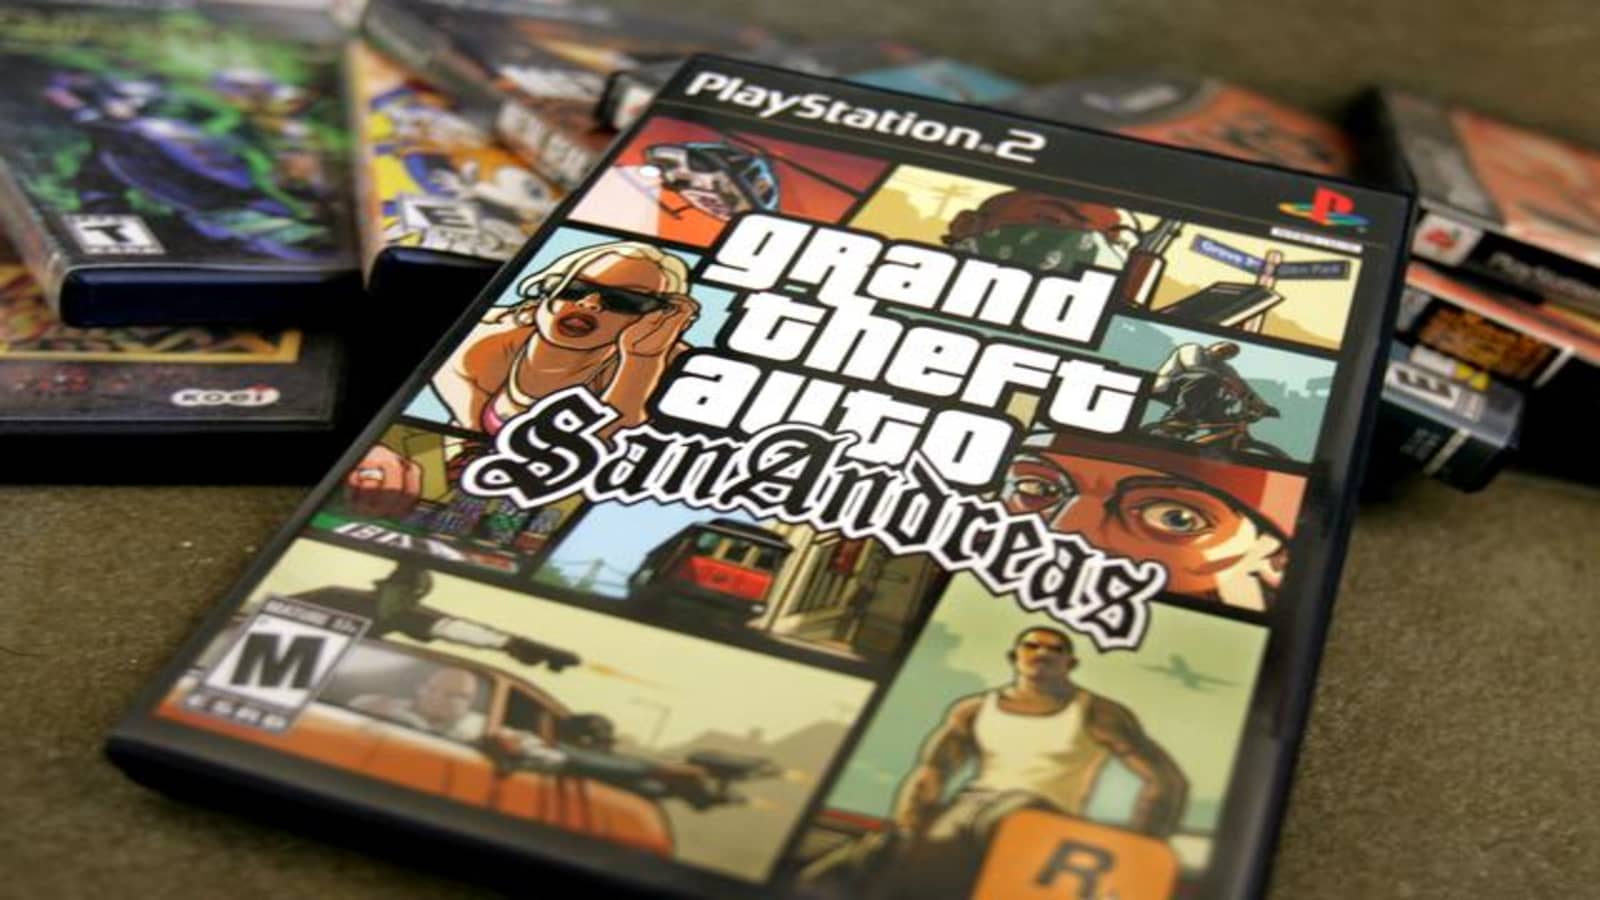 Sony PlayStation 2 Unboxing (PS2 Phat Console) GTA: San Andreas